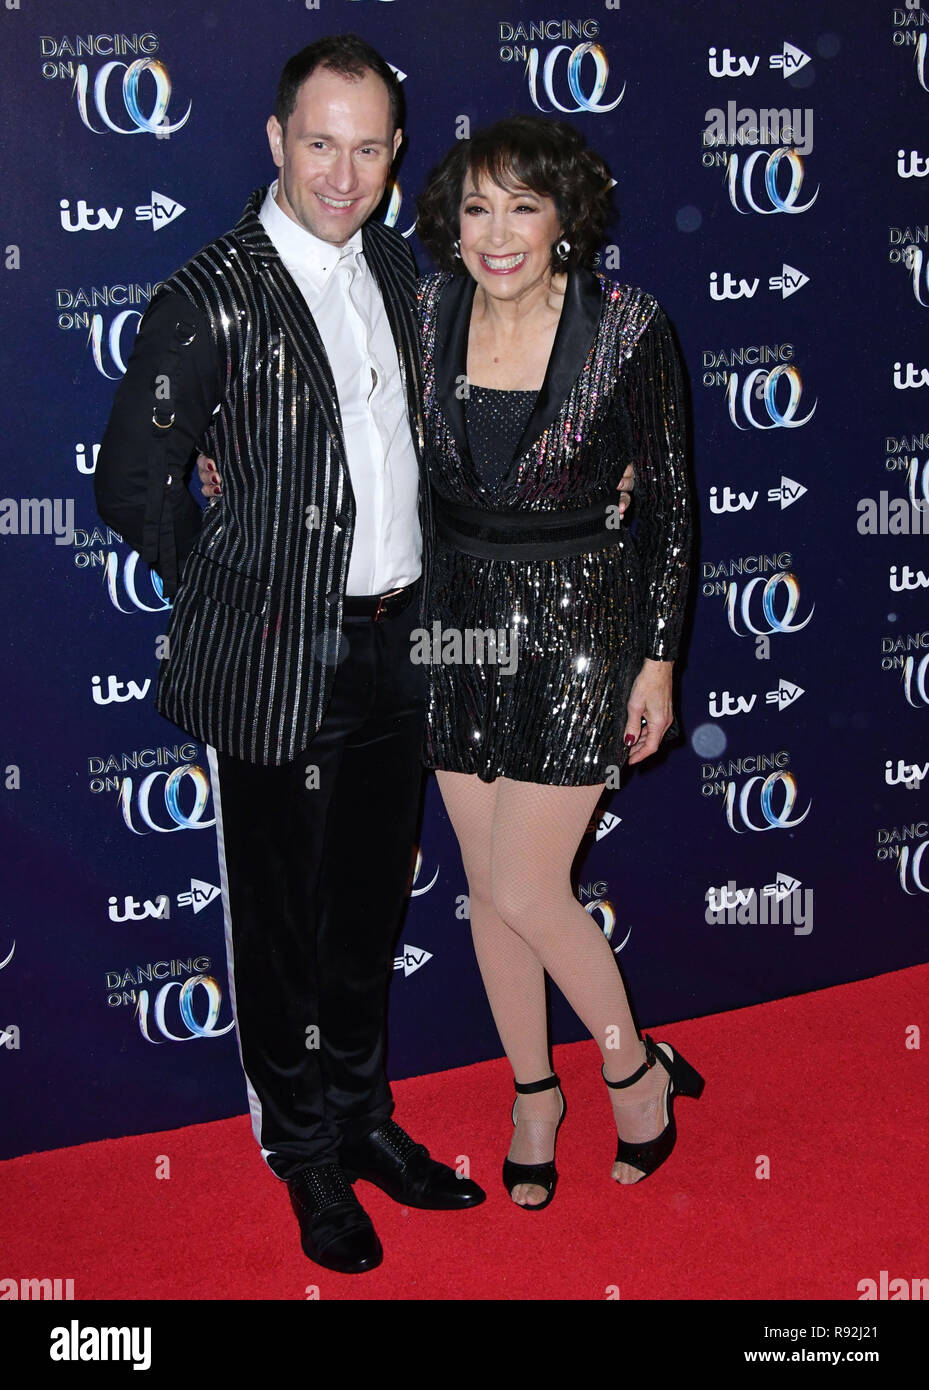 London, UK. 18th December, 2018. Lukasz Rozycki, Didi Conn at launch to celebrate the new series of the ITV Dancing On Ice skating competition, at Natural History Museum Credit: Nils Jorgensen/Alamy Live News Stock Photo